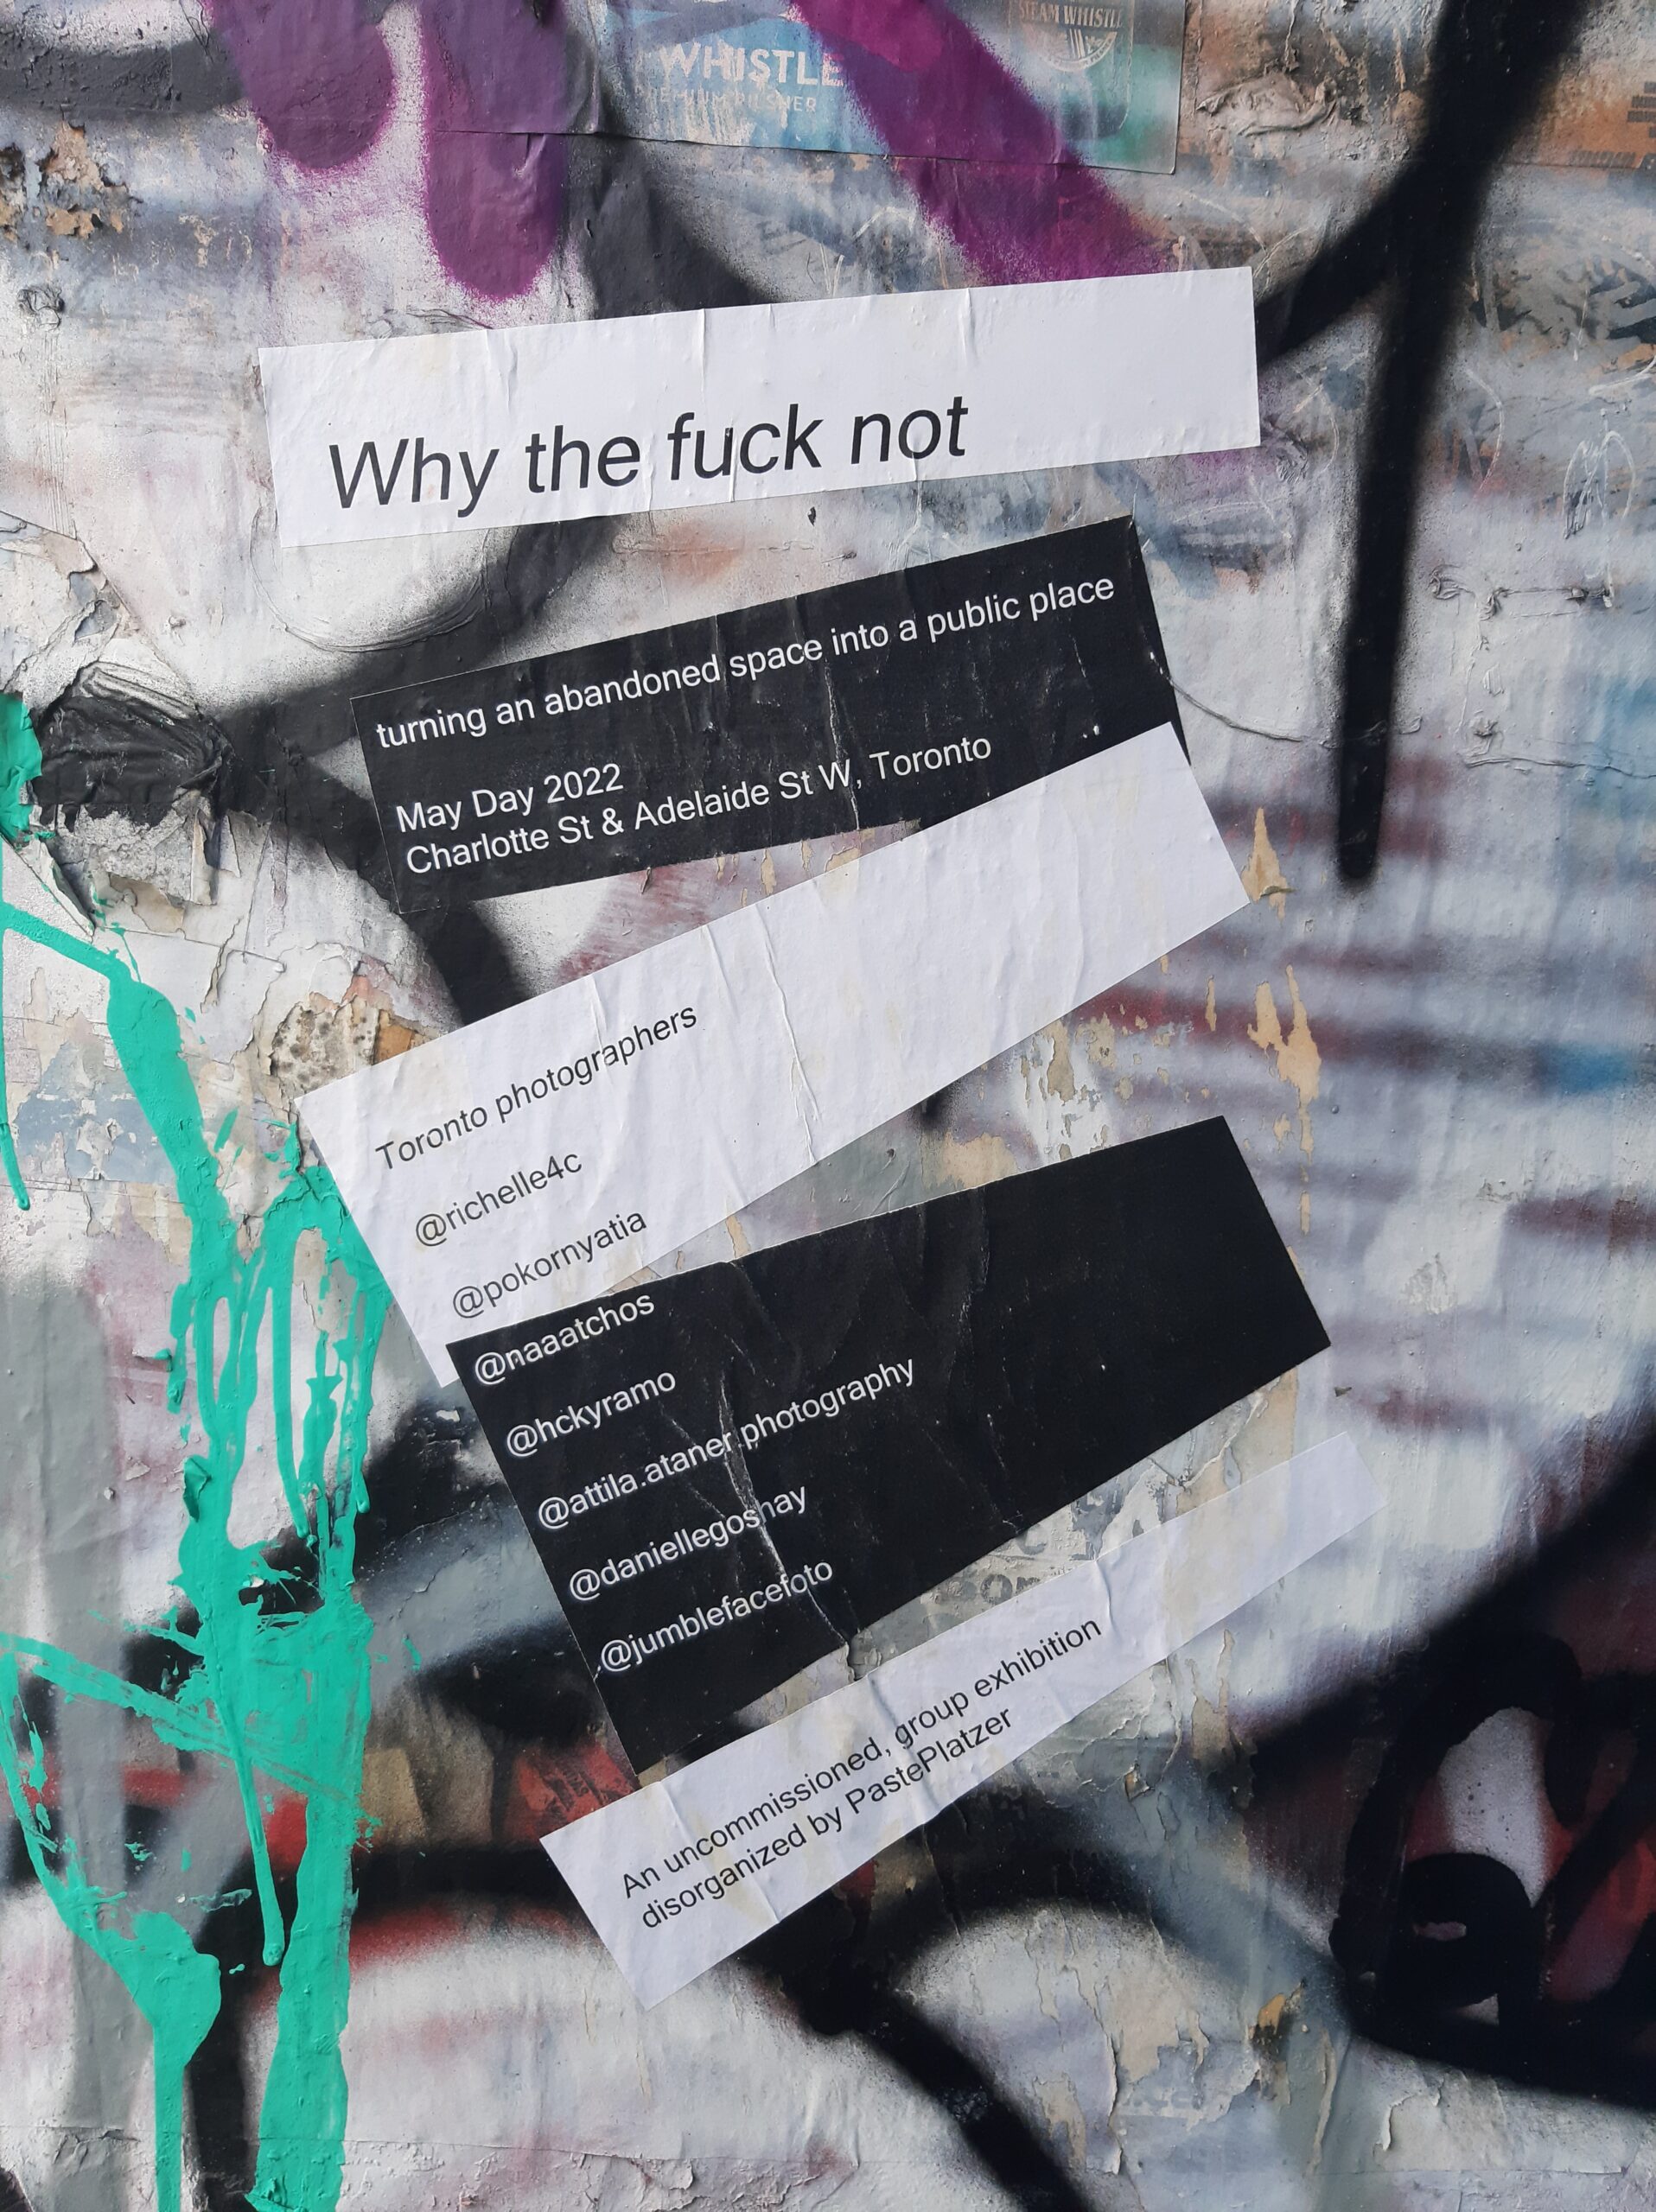 decorative image of a paste up that says "why the fuck not"